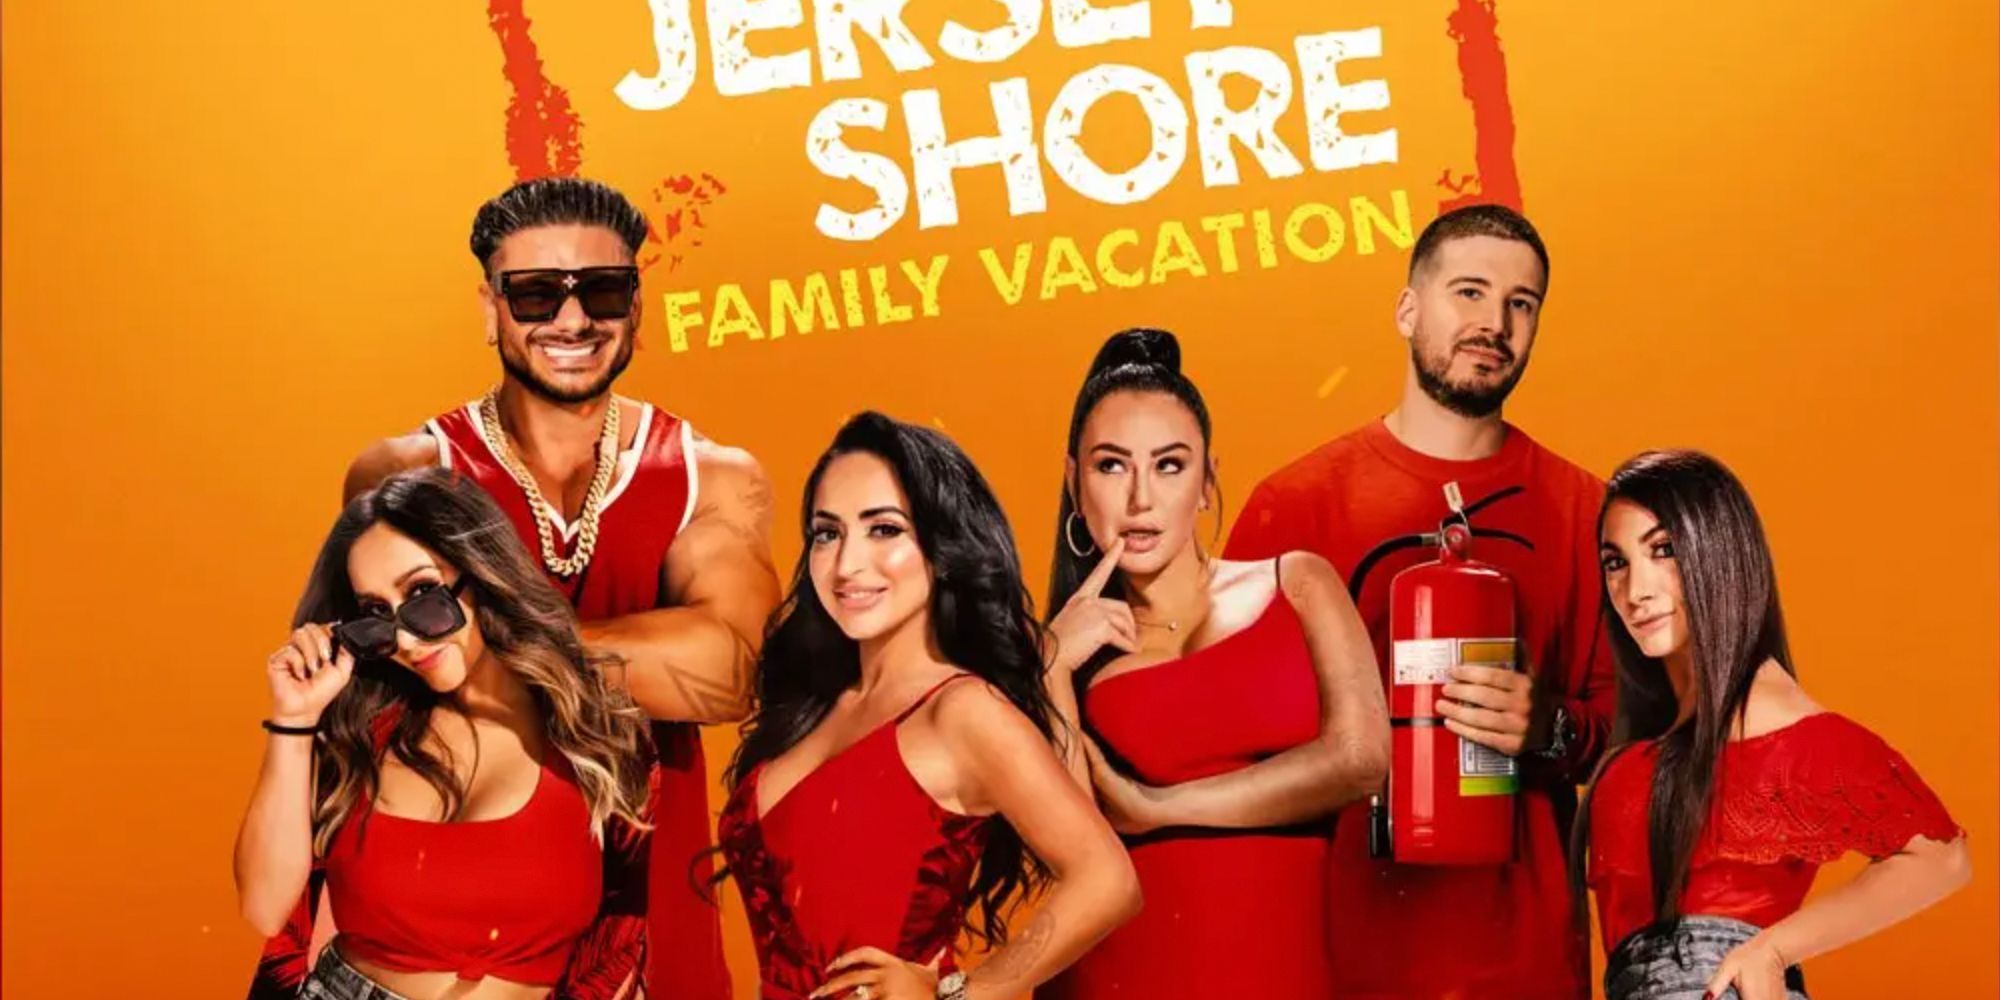 The cast of Jersey Shore Family Vacation Season 5 wearing red in a promotional image for the series